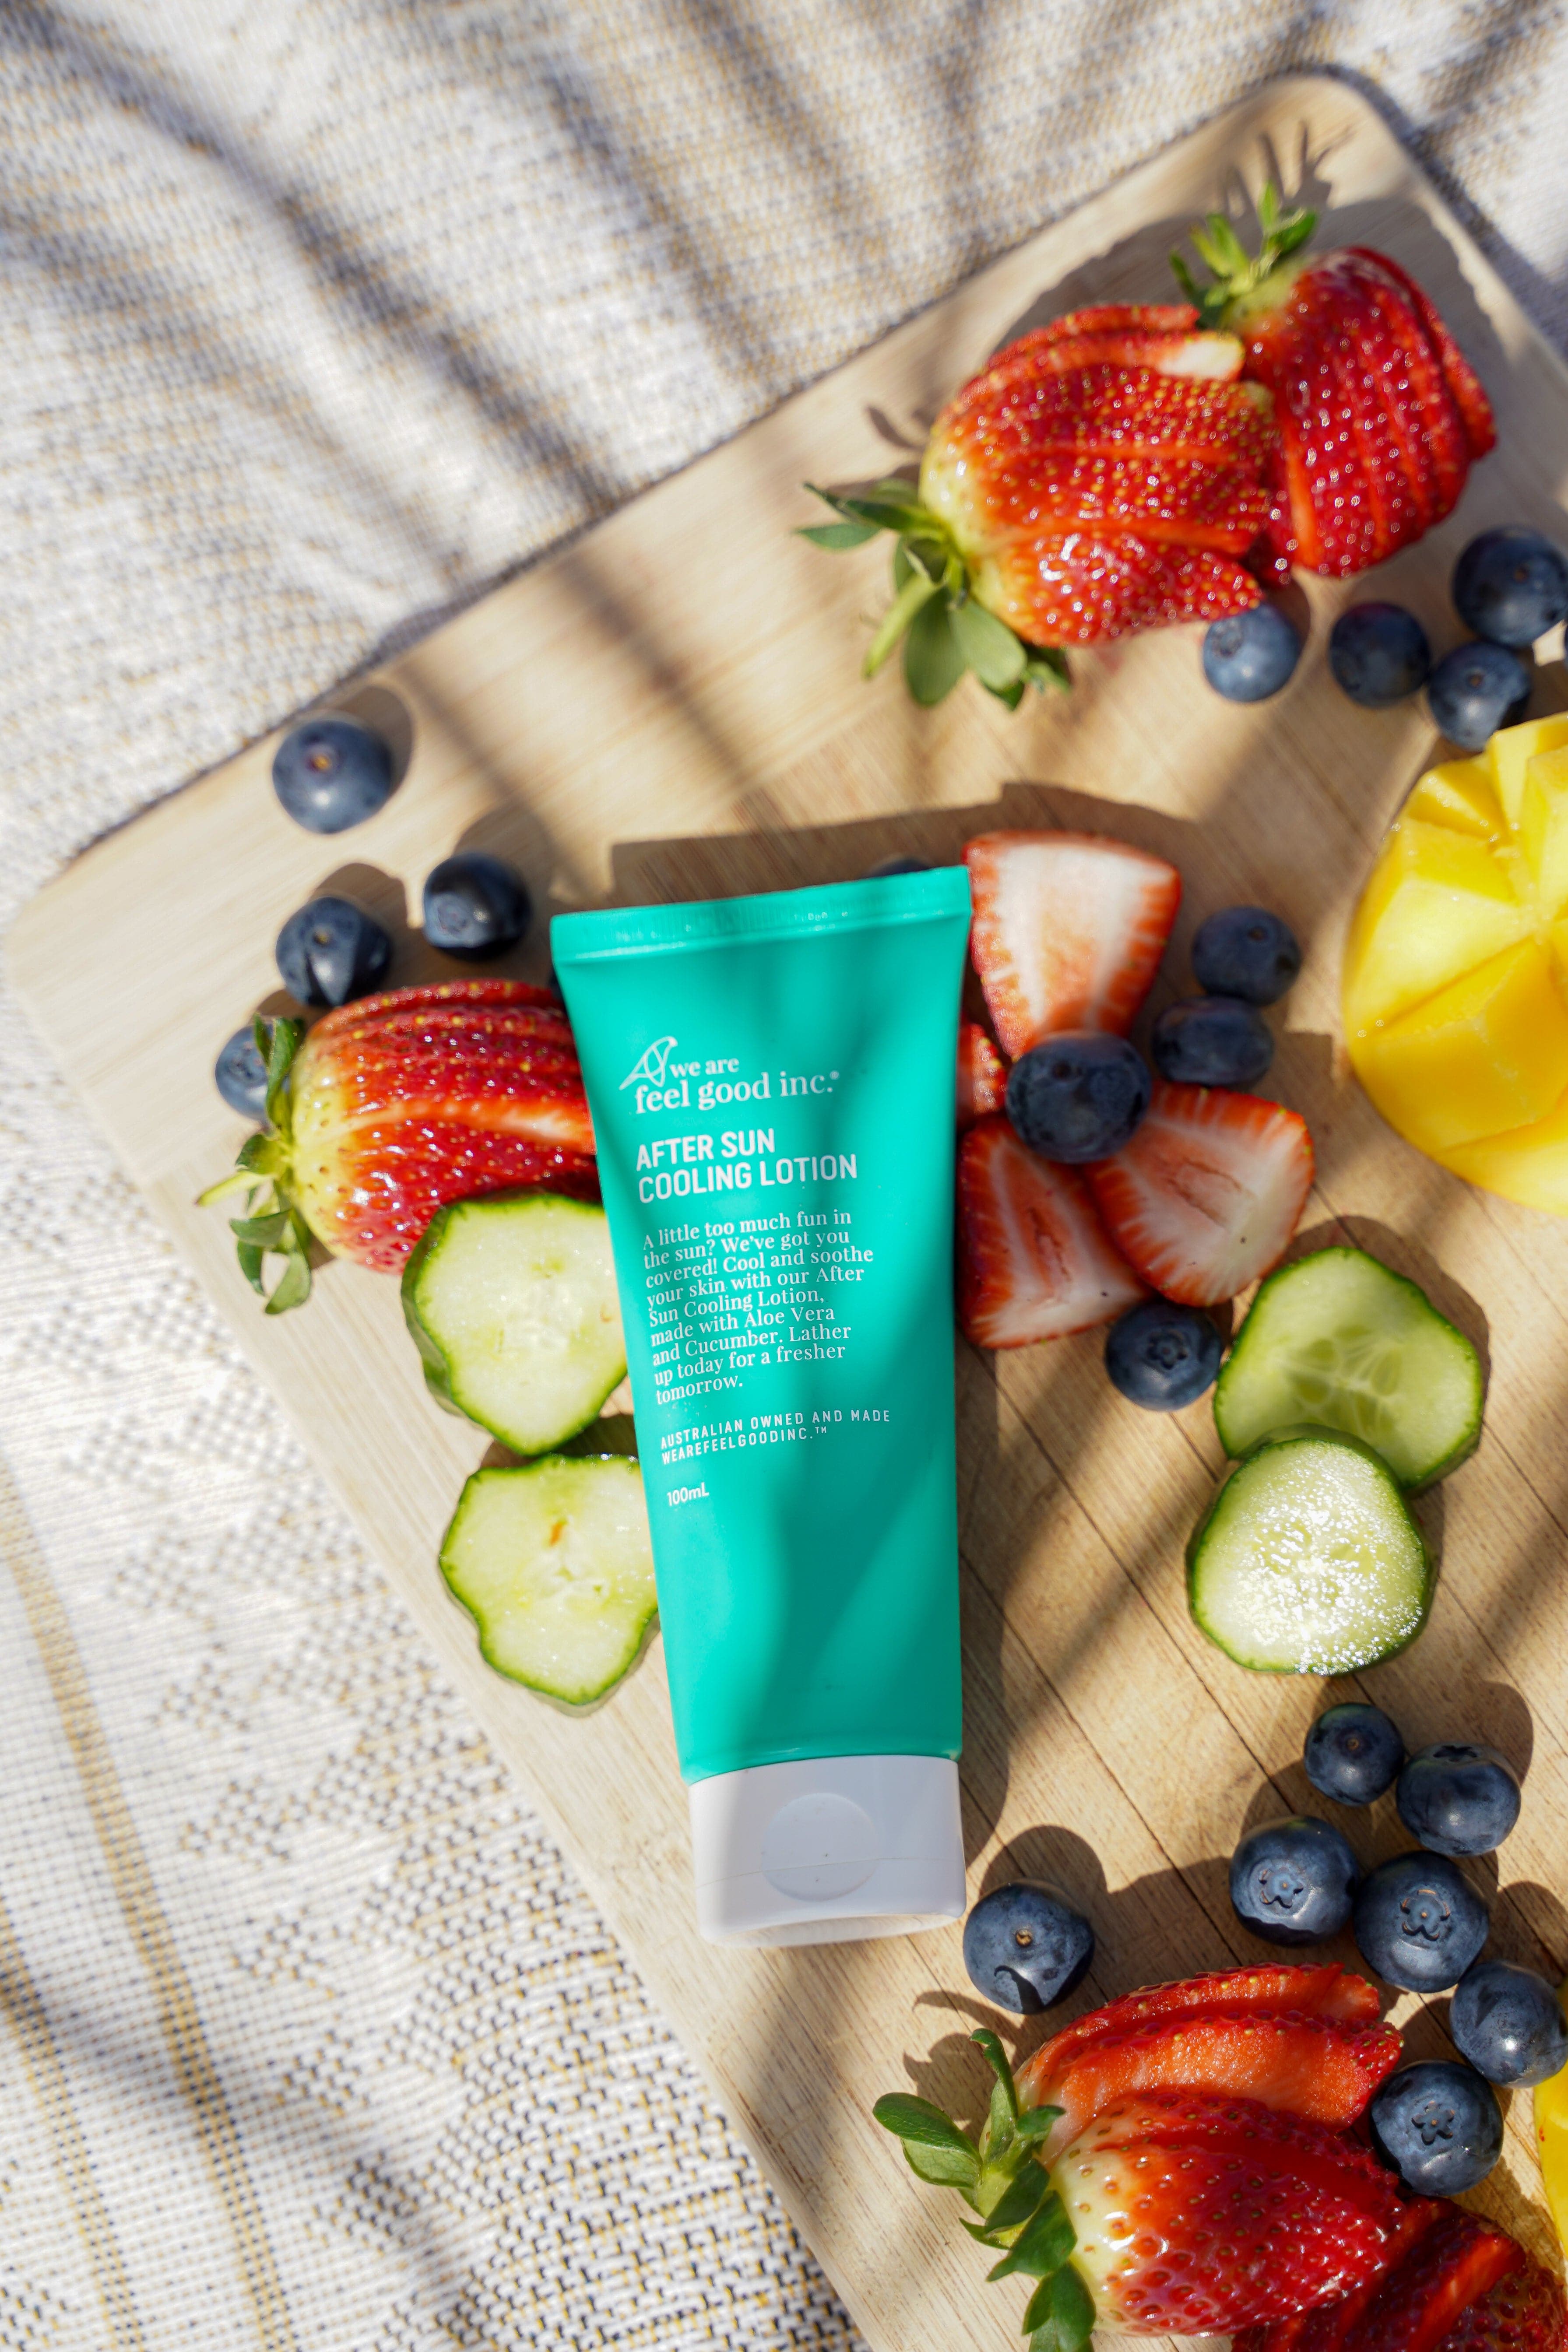 We Are Feel Good | After Sun Cooling Lotion